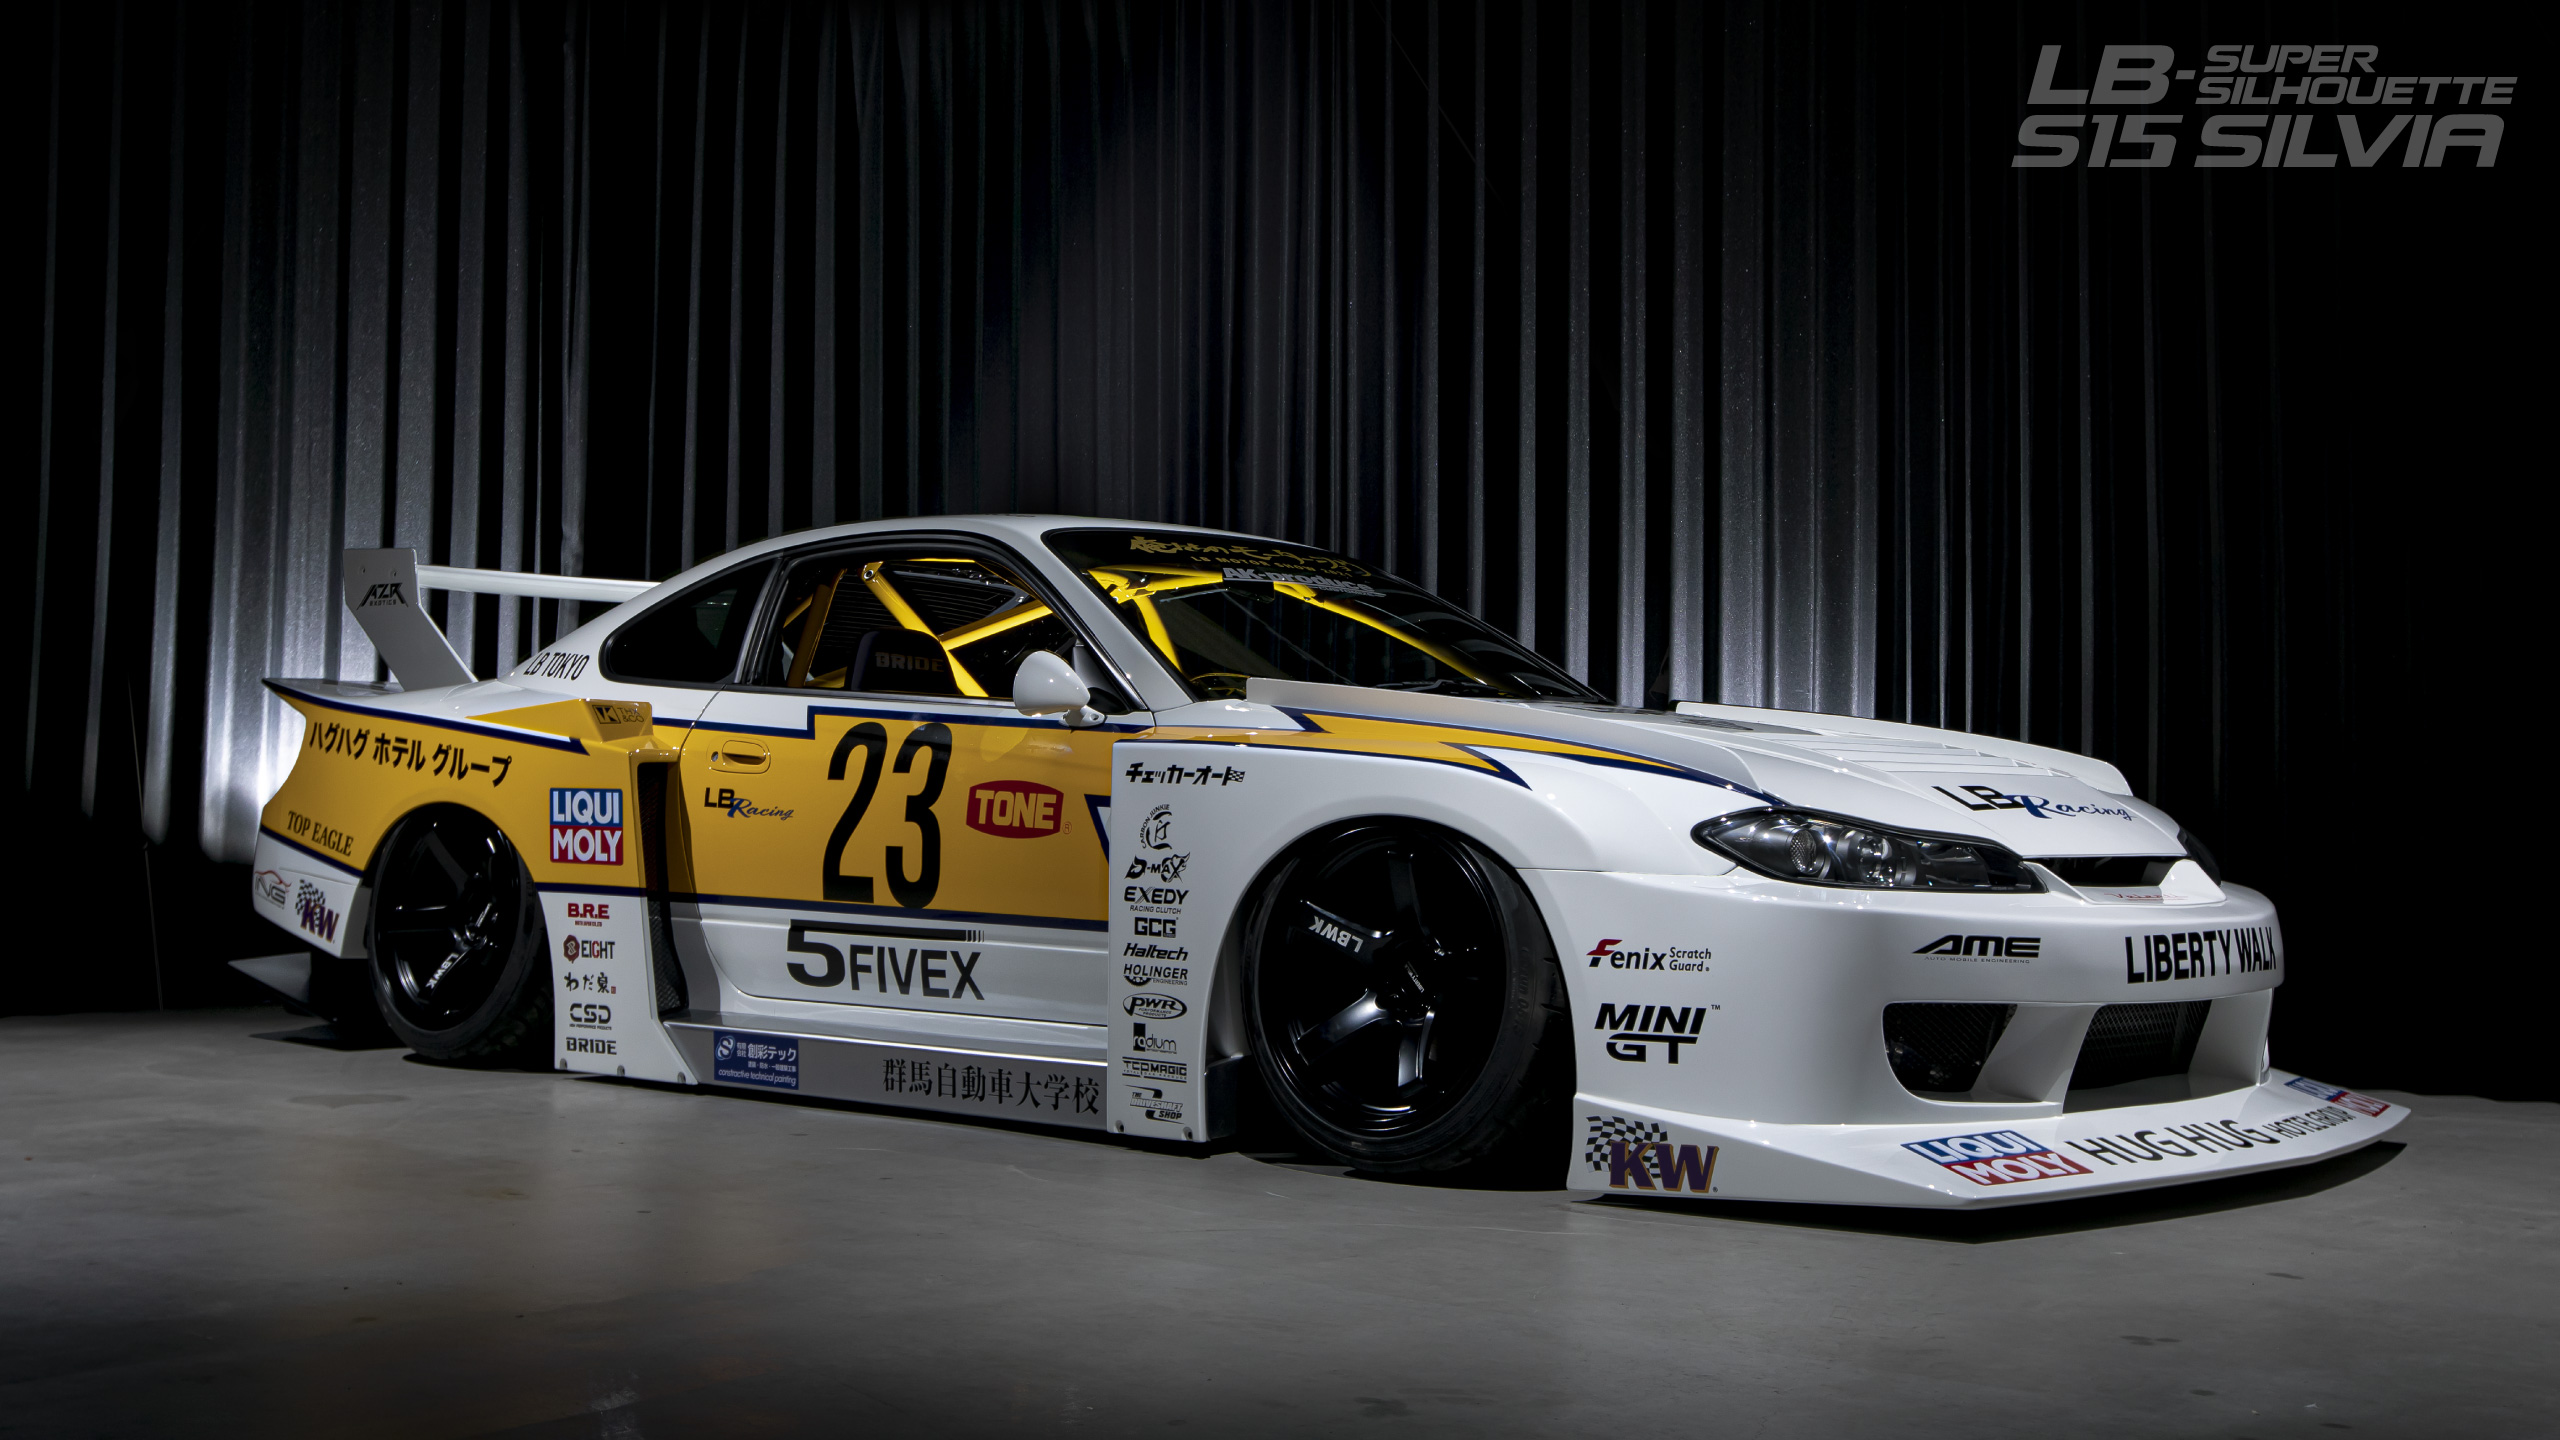 LB Super Silhouette Nissan Silvia S Background Images And Wallpapers YL Computing